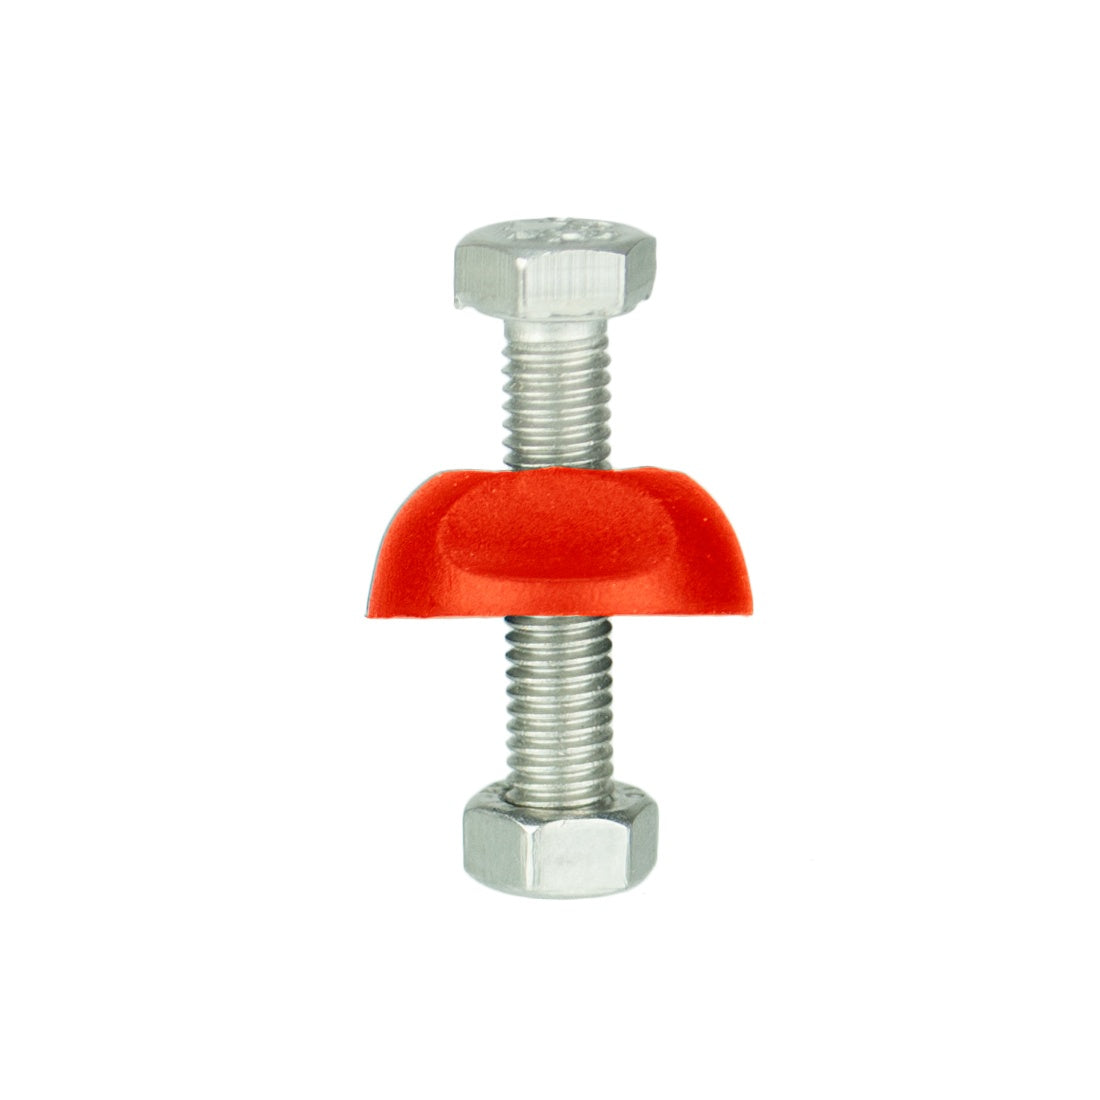 XERO Clamp Nut Red Partially Threaded View